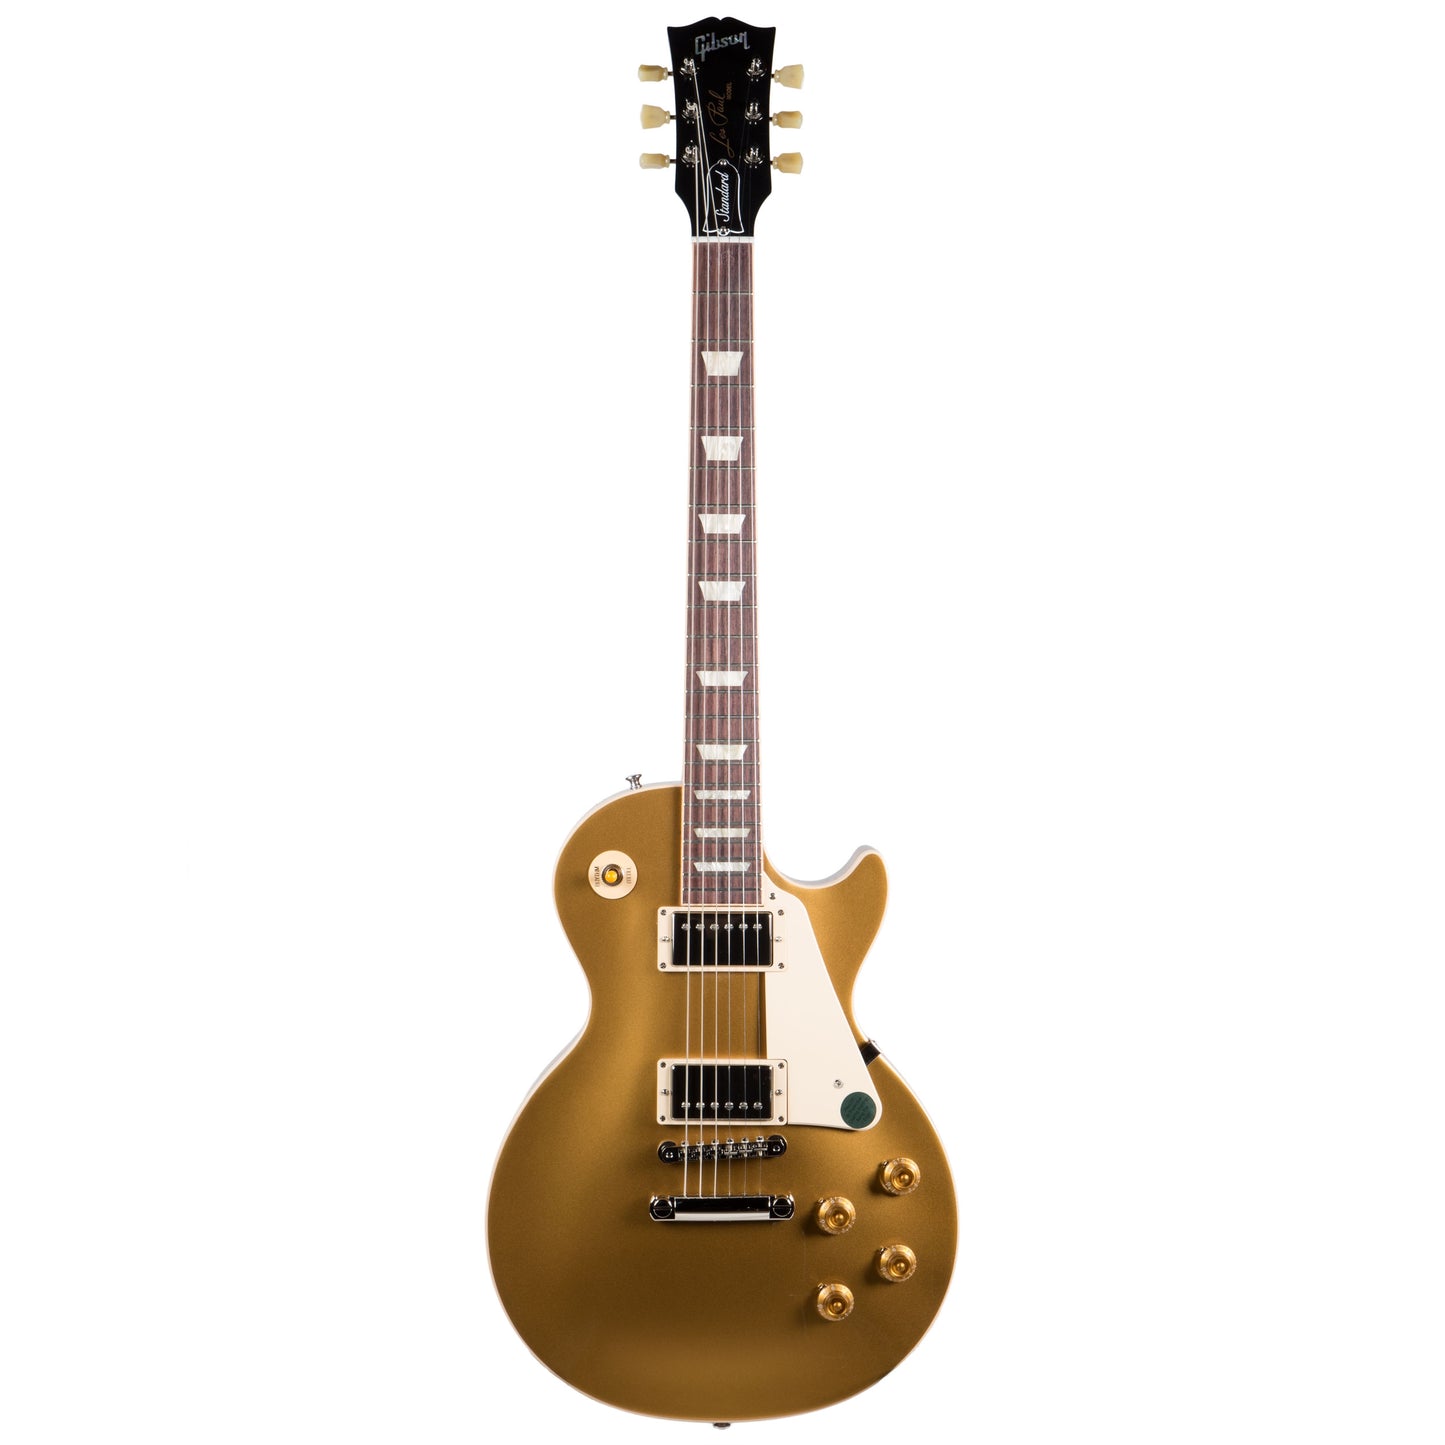 Gibson Les Paul Standard ‘50’s Gold Top Electric Guitar